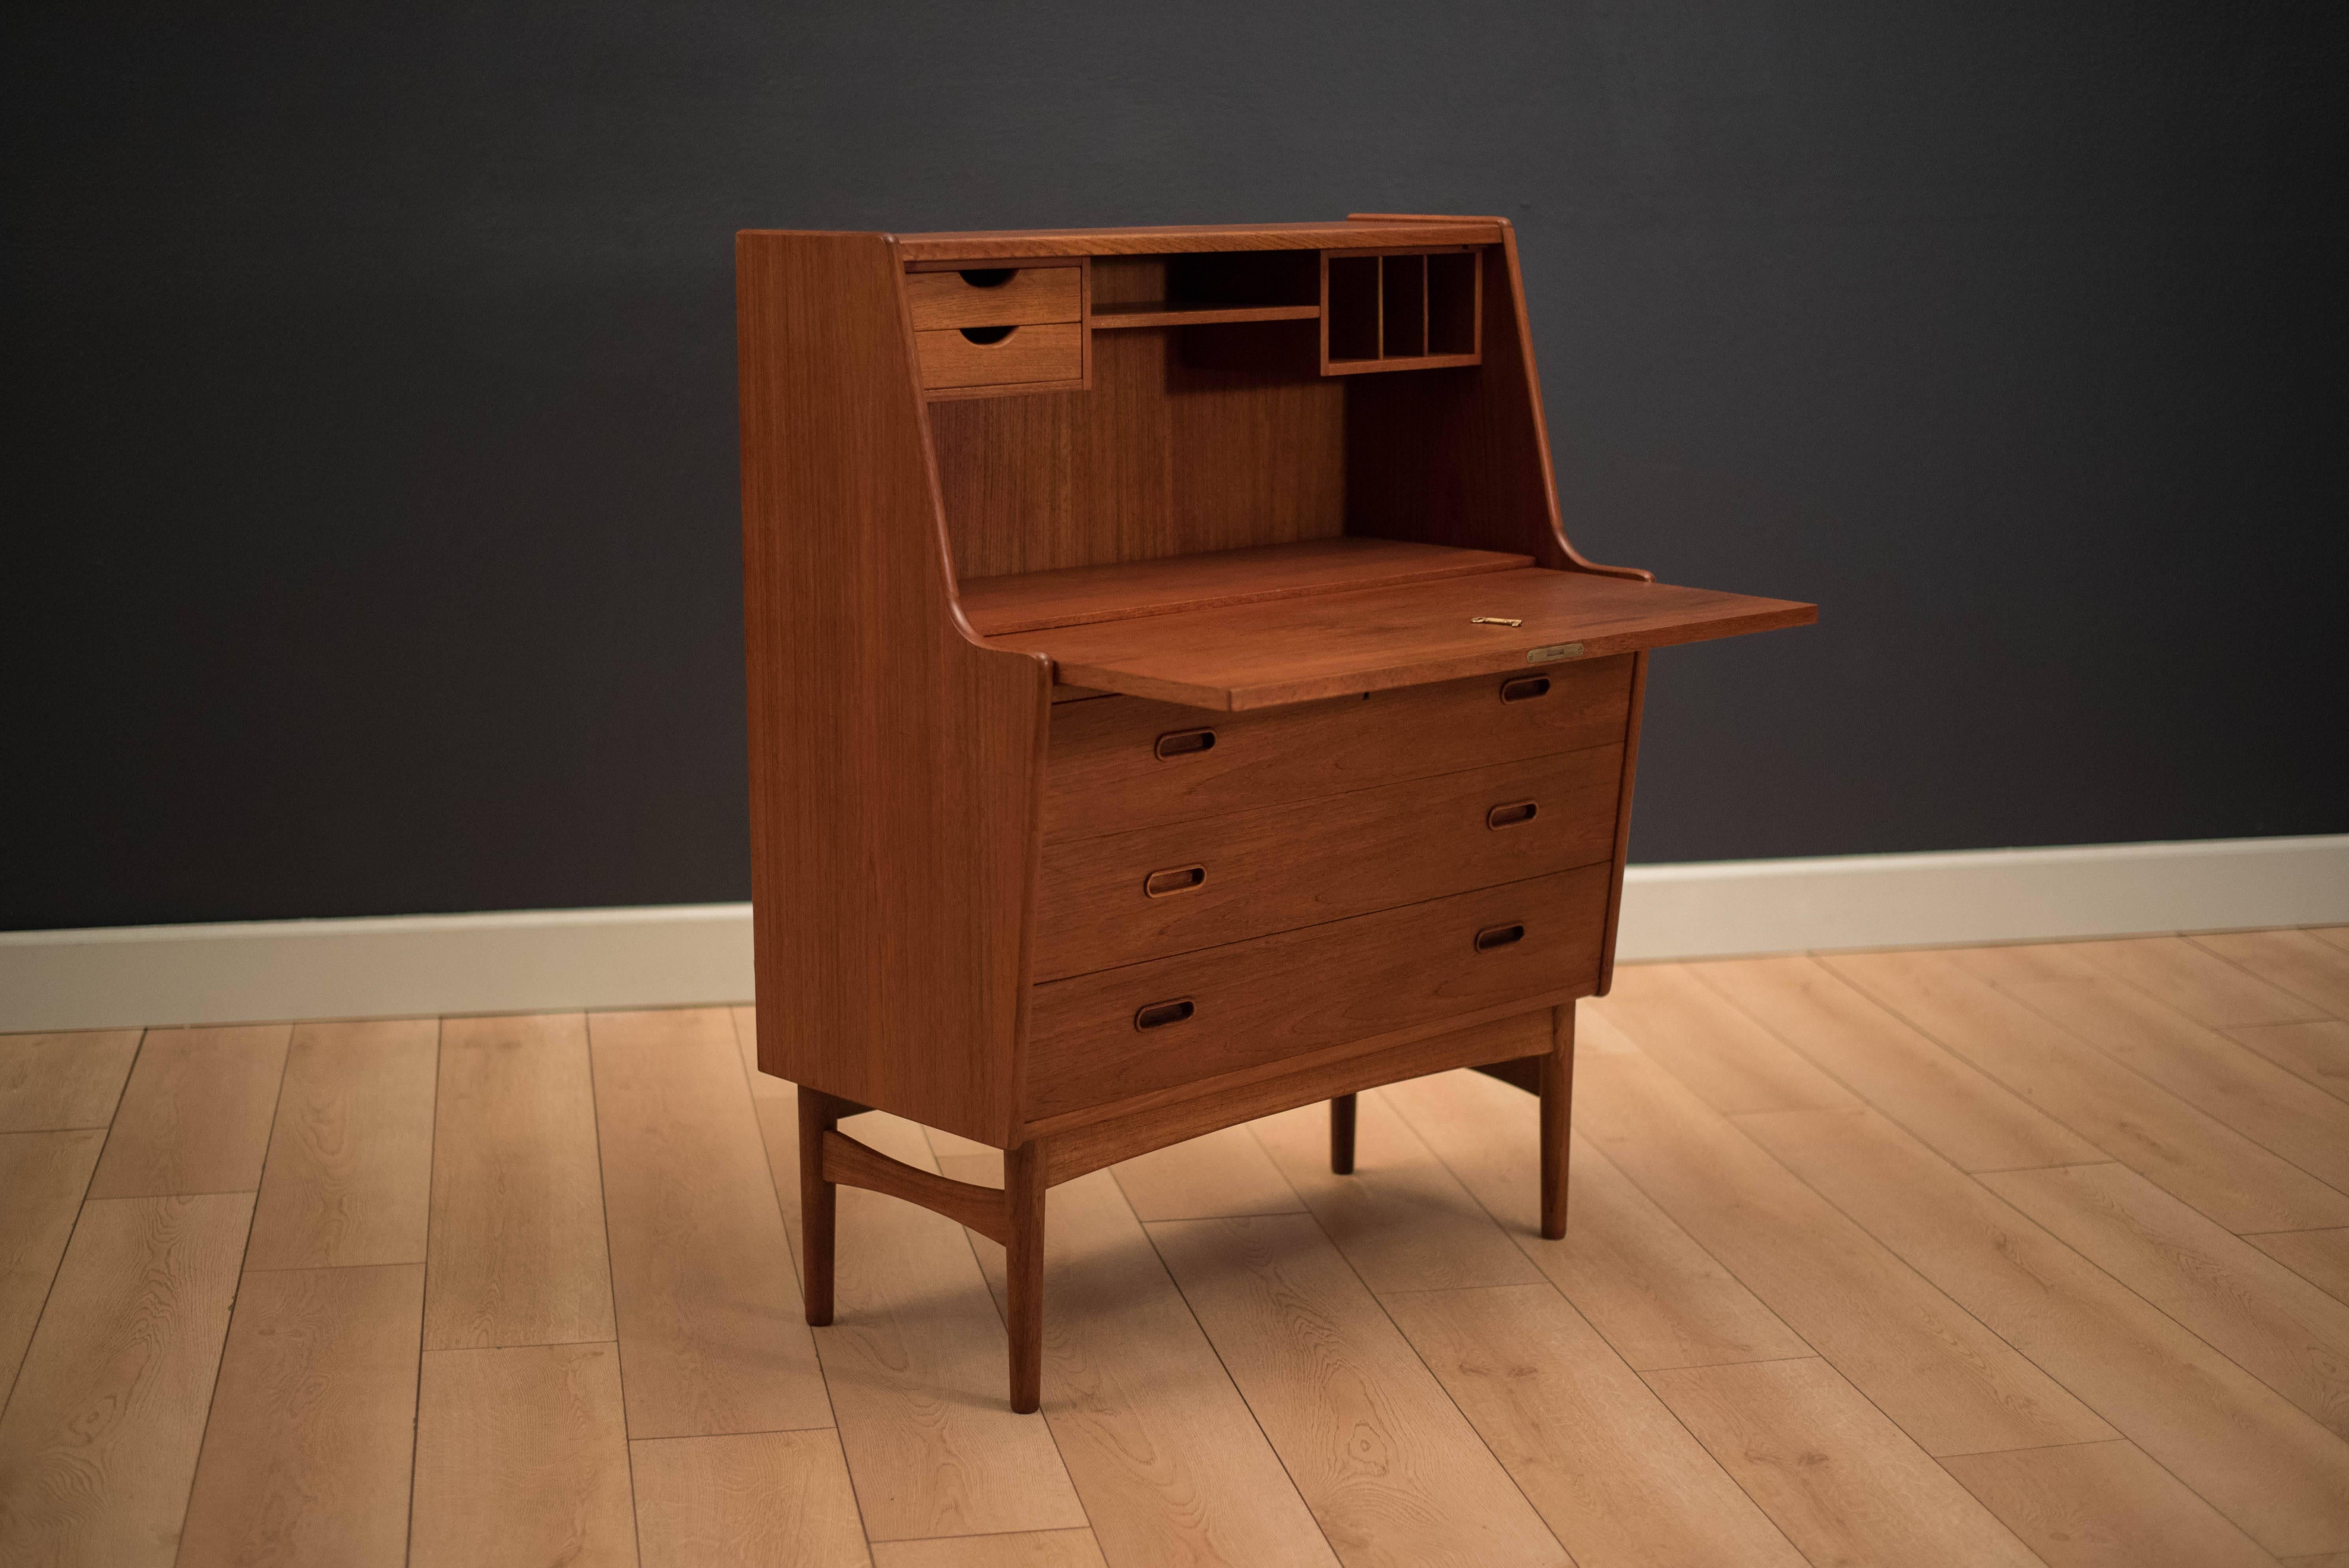 Danish Modern secretary desk designed by Arne Wahl Iversen in teak. This piece displays a beautiful teak grain facade and sculpted wood pulls. Equipped with three storage drawers and hidden compartments behind drop front door. Includes the original